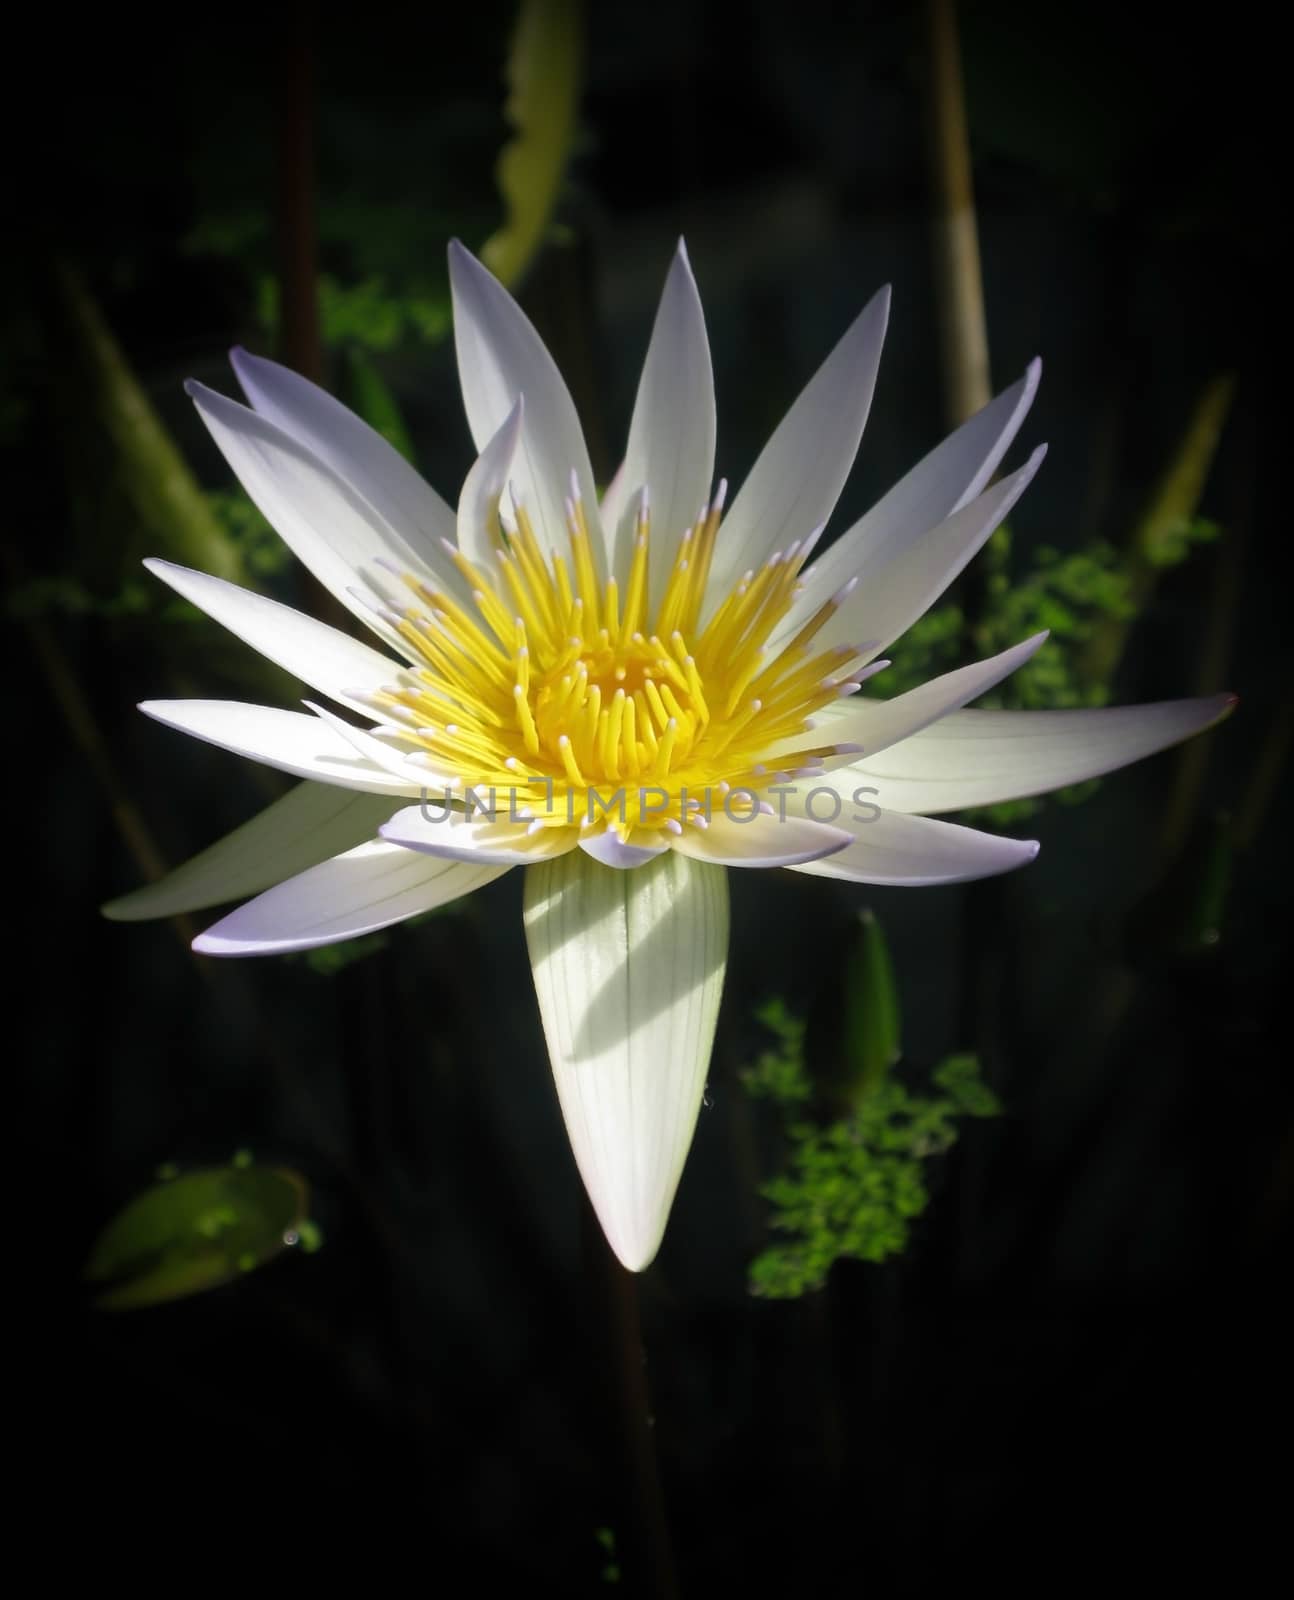 Waterlily closeup, in centered layout, fading into black.